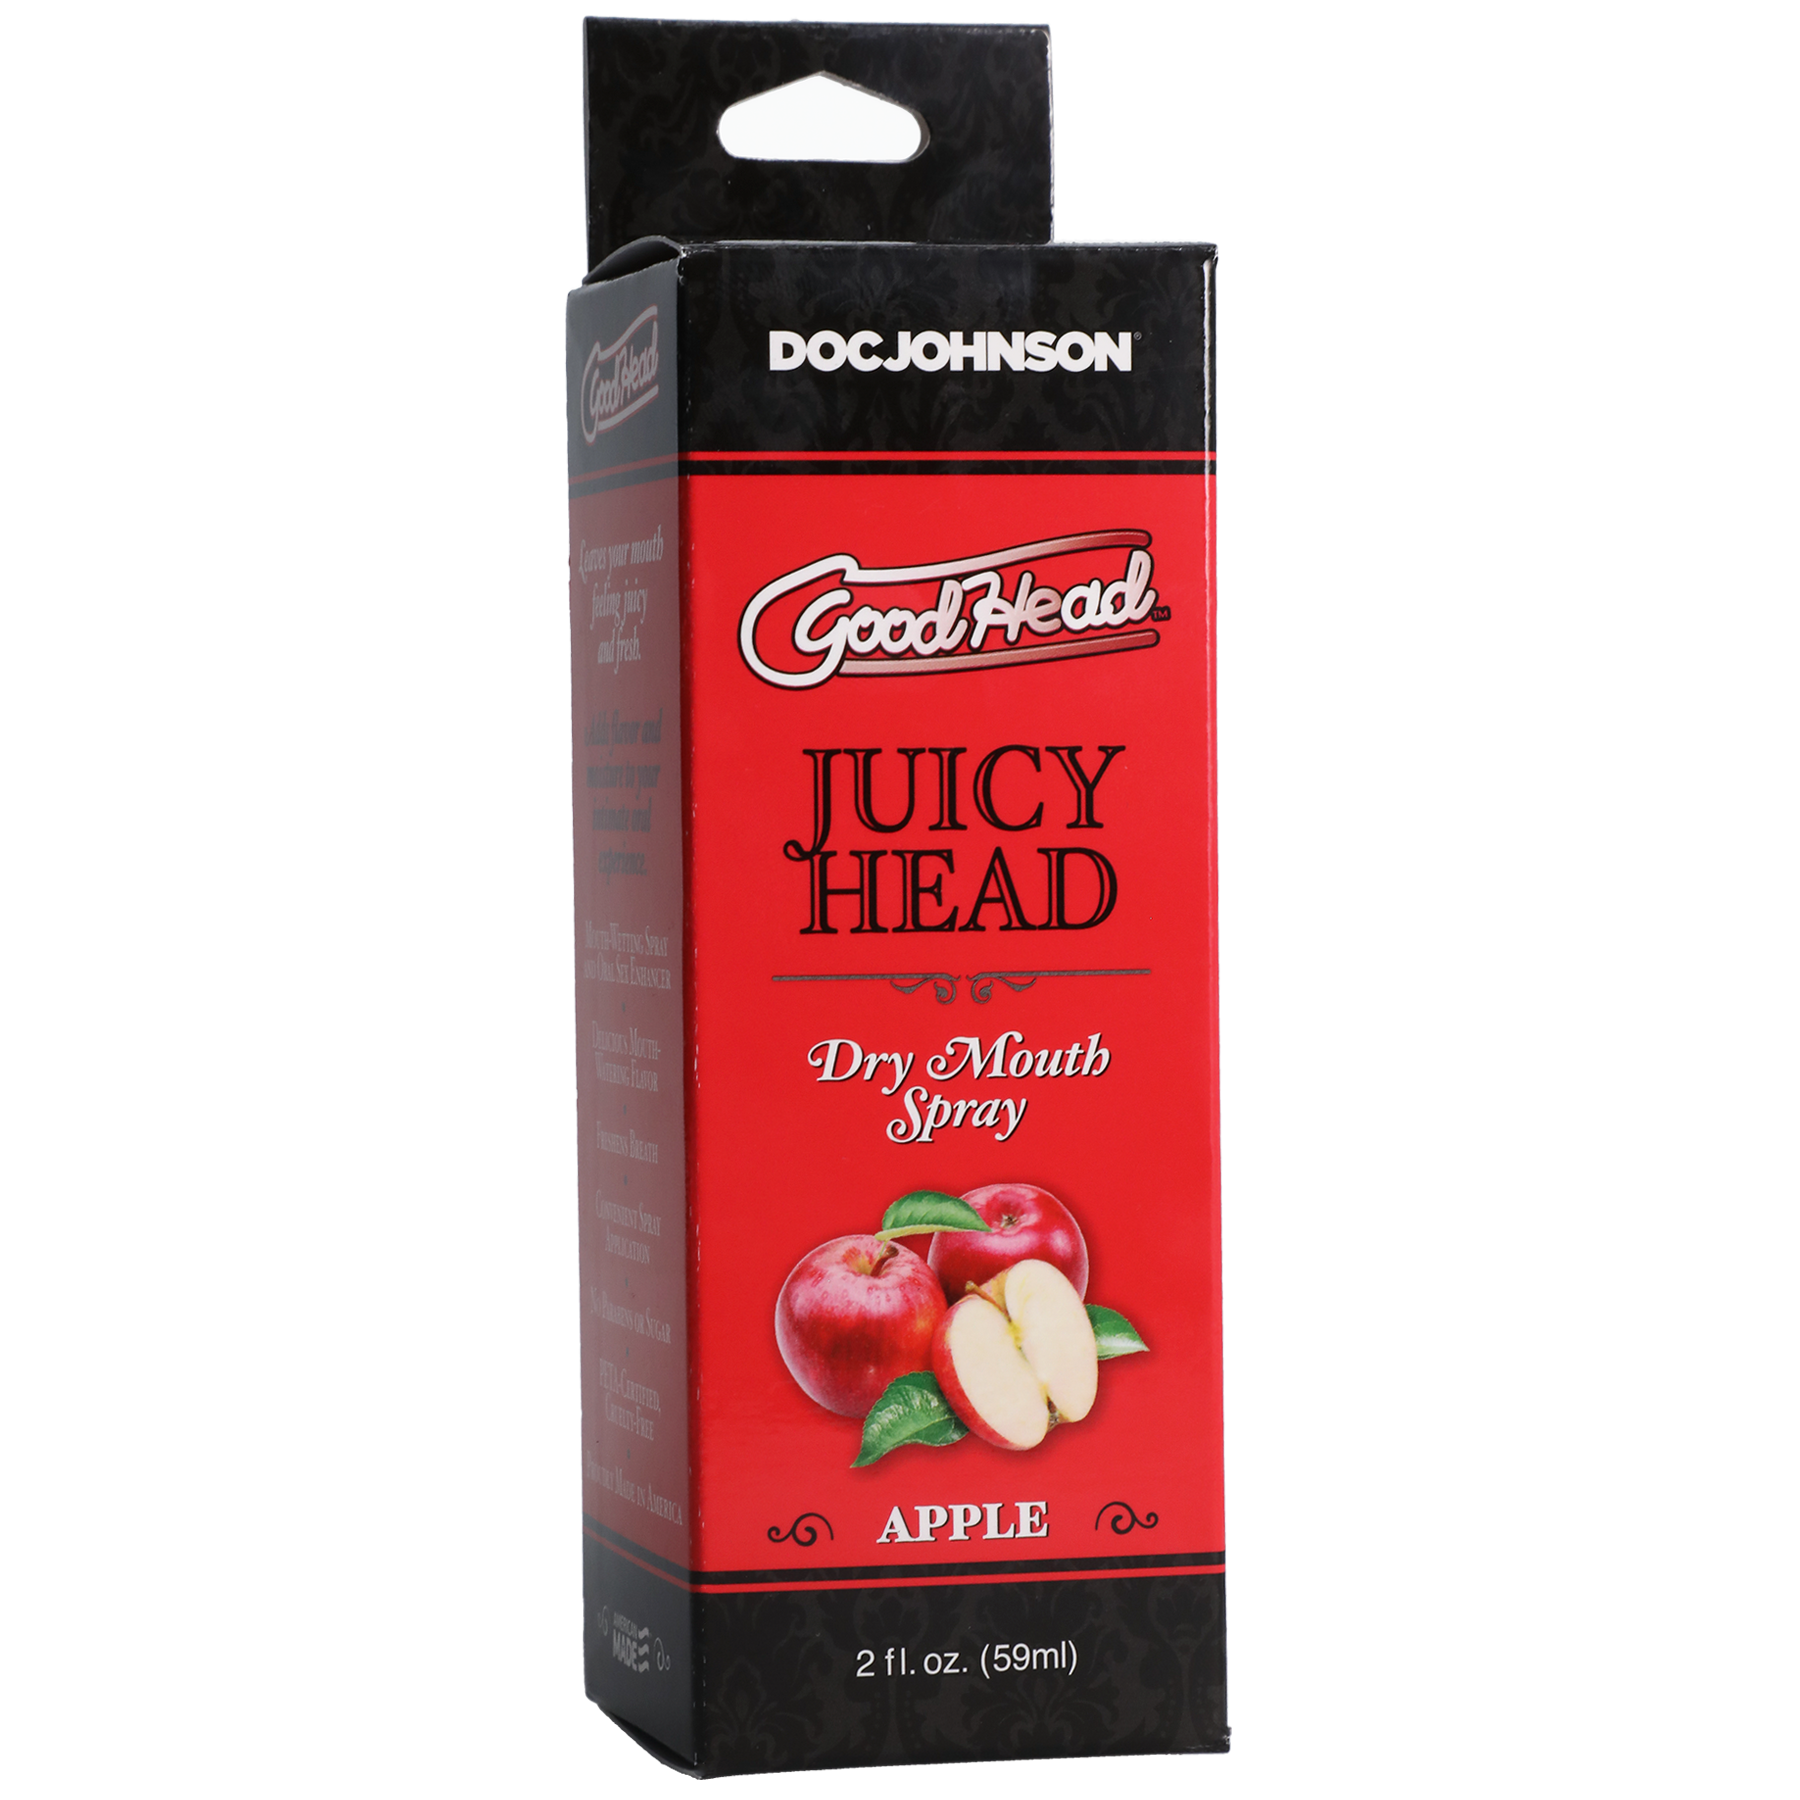 Photo of the package for the GoodHead Juicy Head from Doc Johnson (apple).